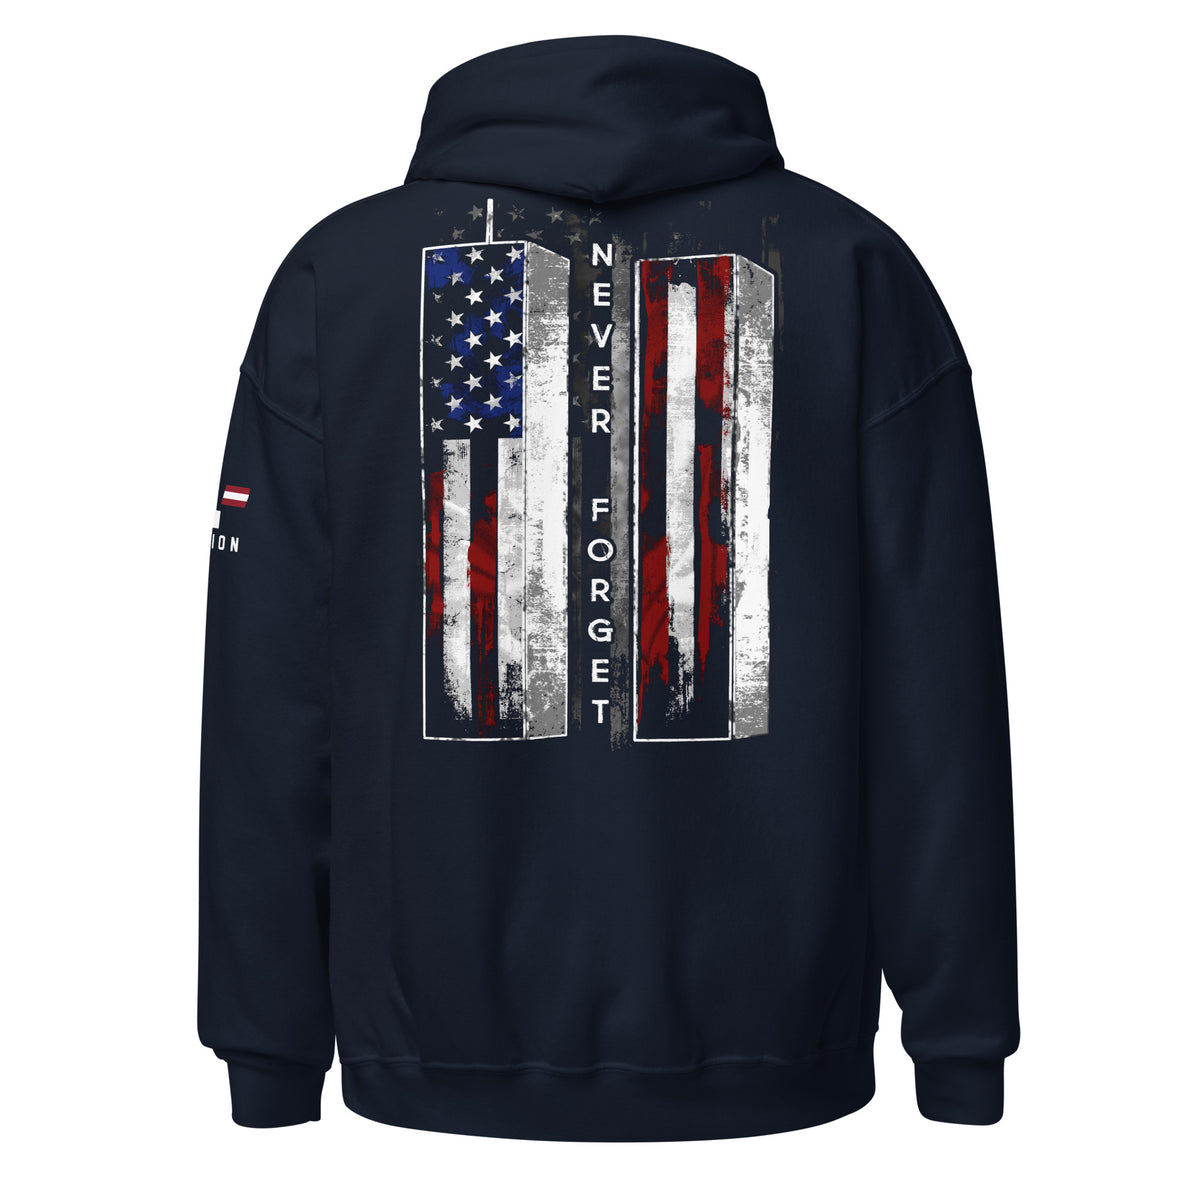 September 11th - NEVER FORGET Hoodie